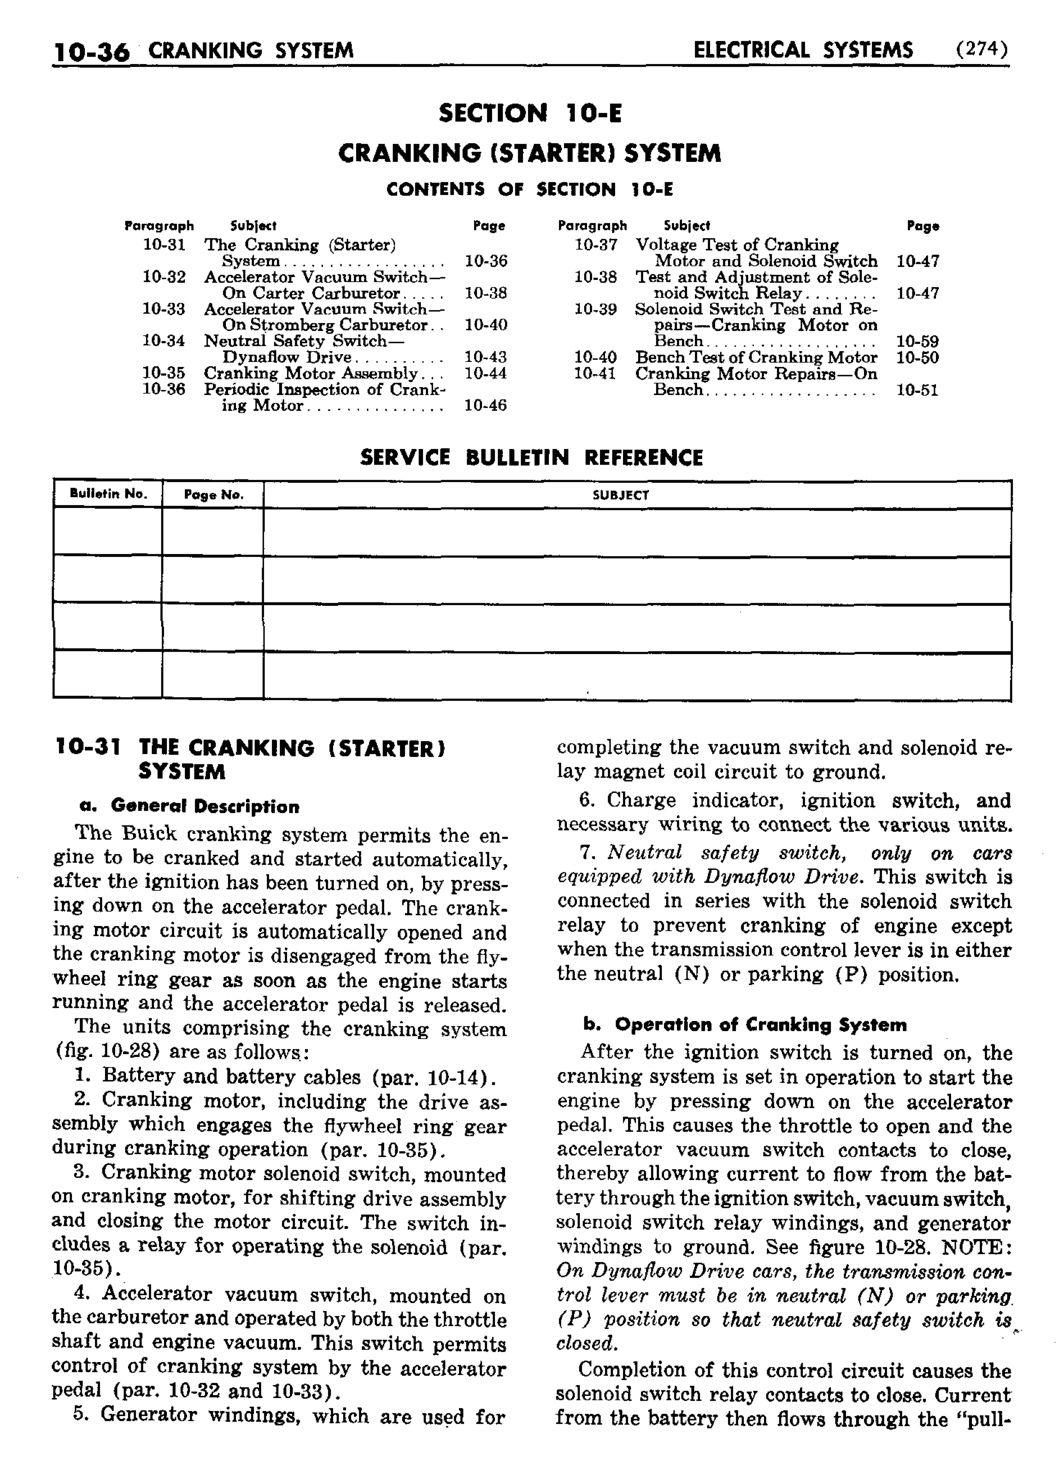 n_11 1950 Buick Shop Manual - Electrical Systems-036-036.jpg